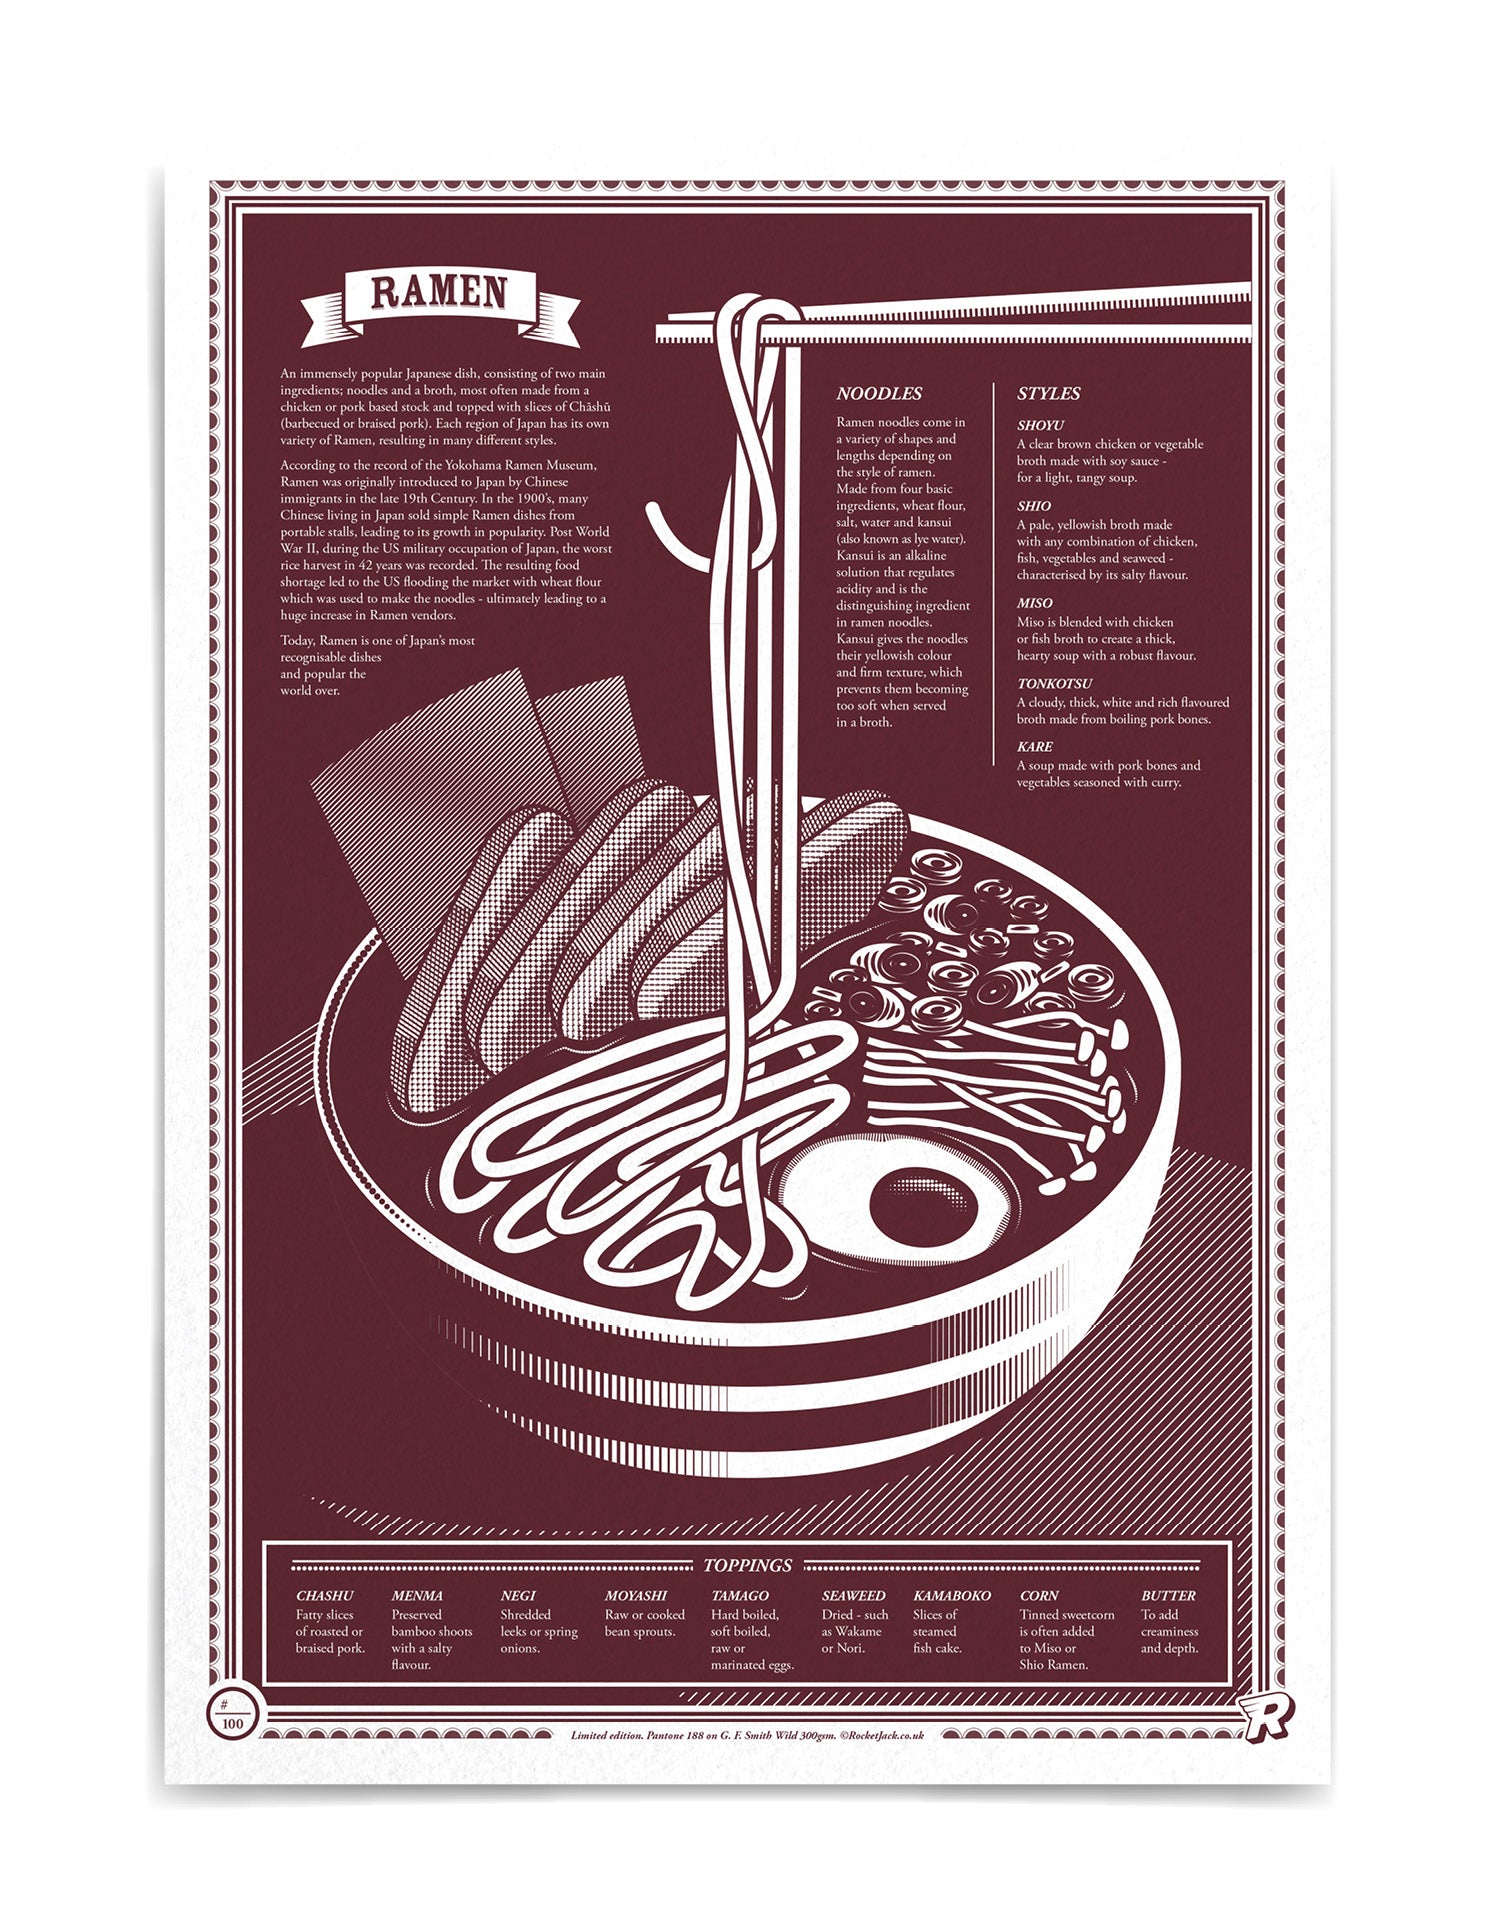 limited edition Infographic art print depicting a diagram of the japanese ramen in monotone dark red ink